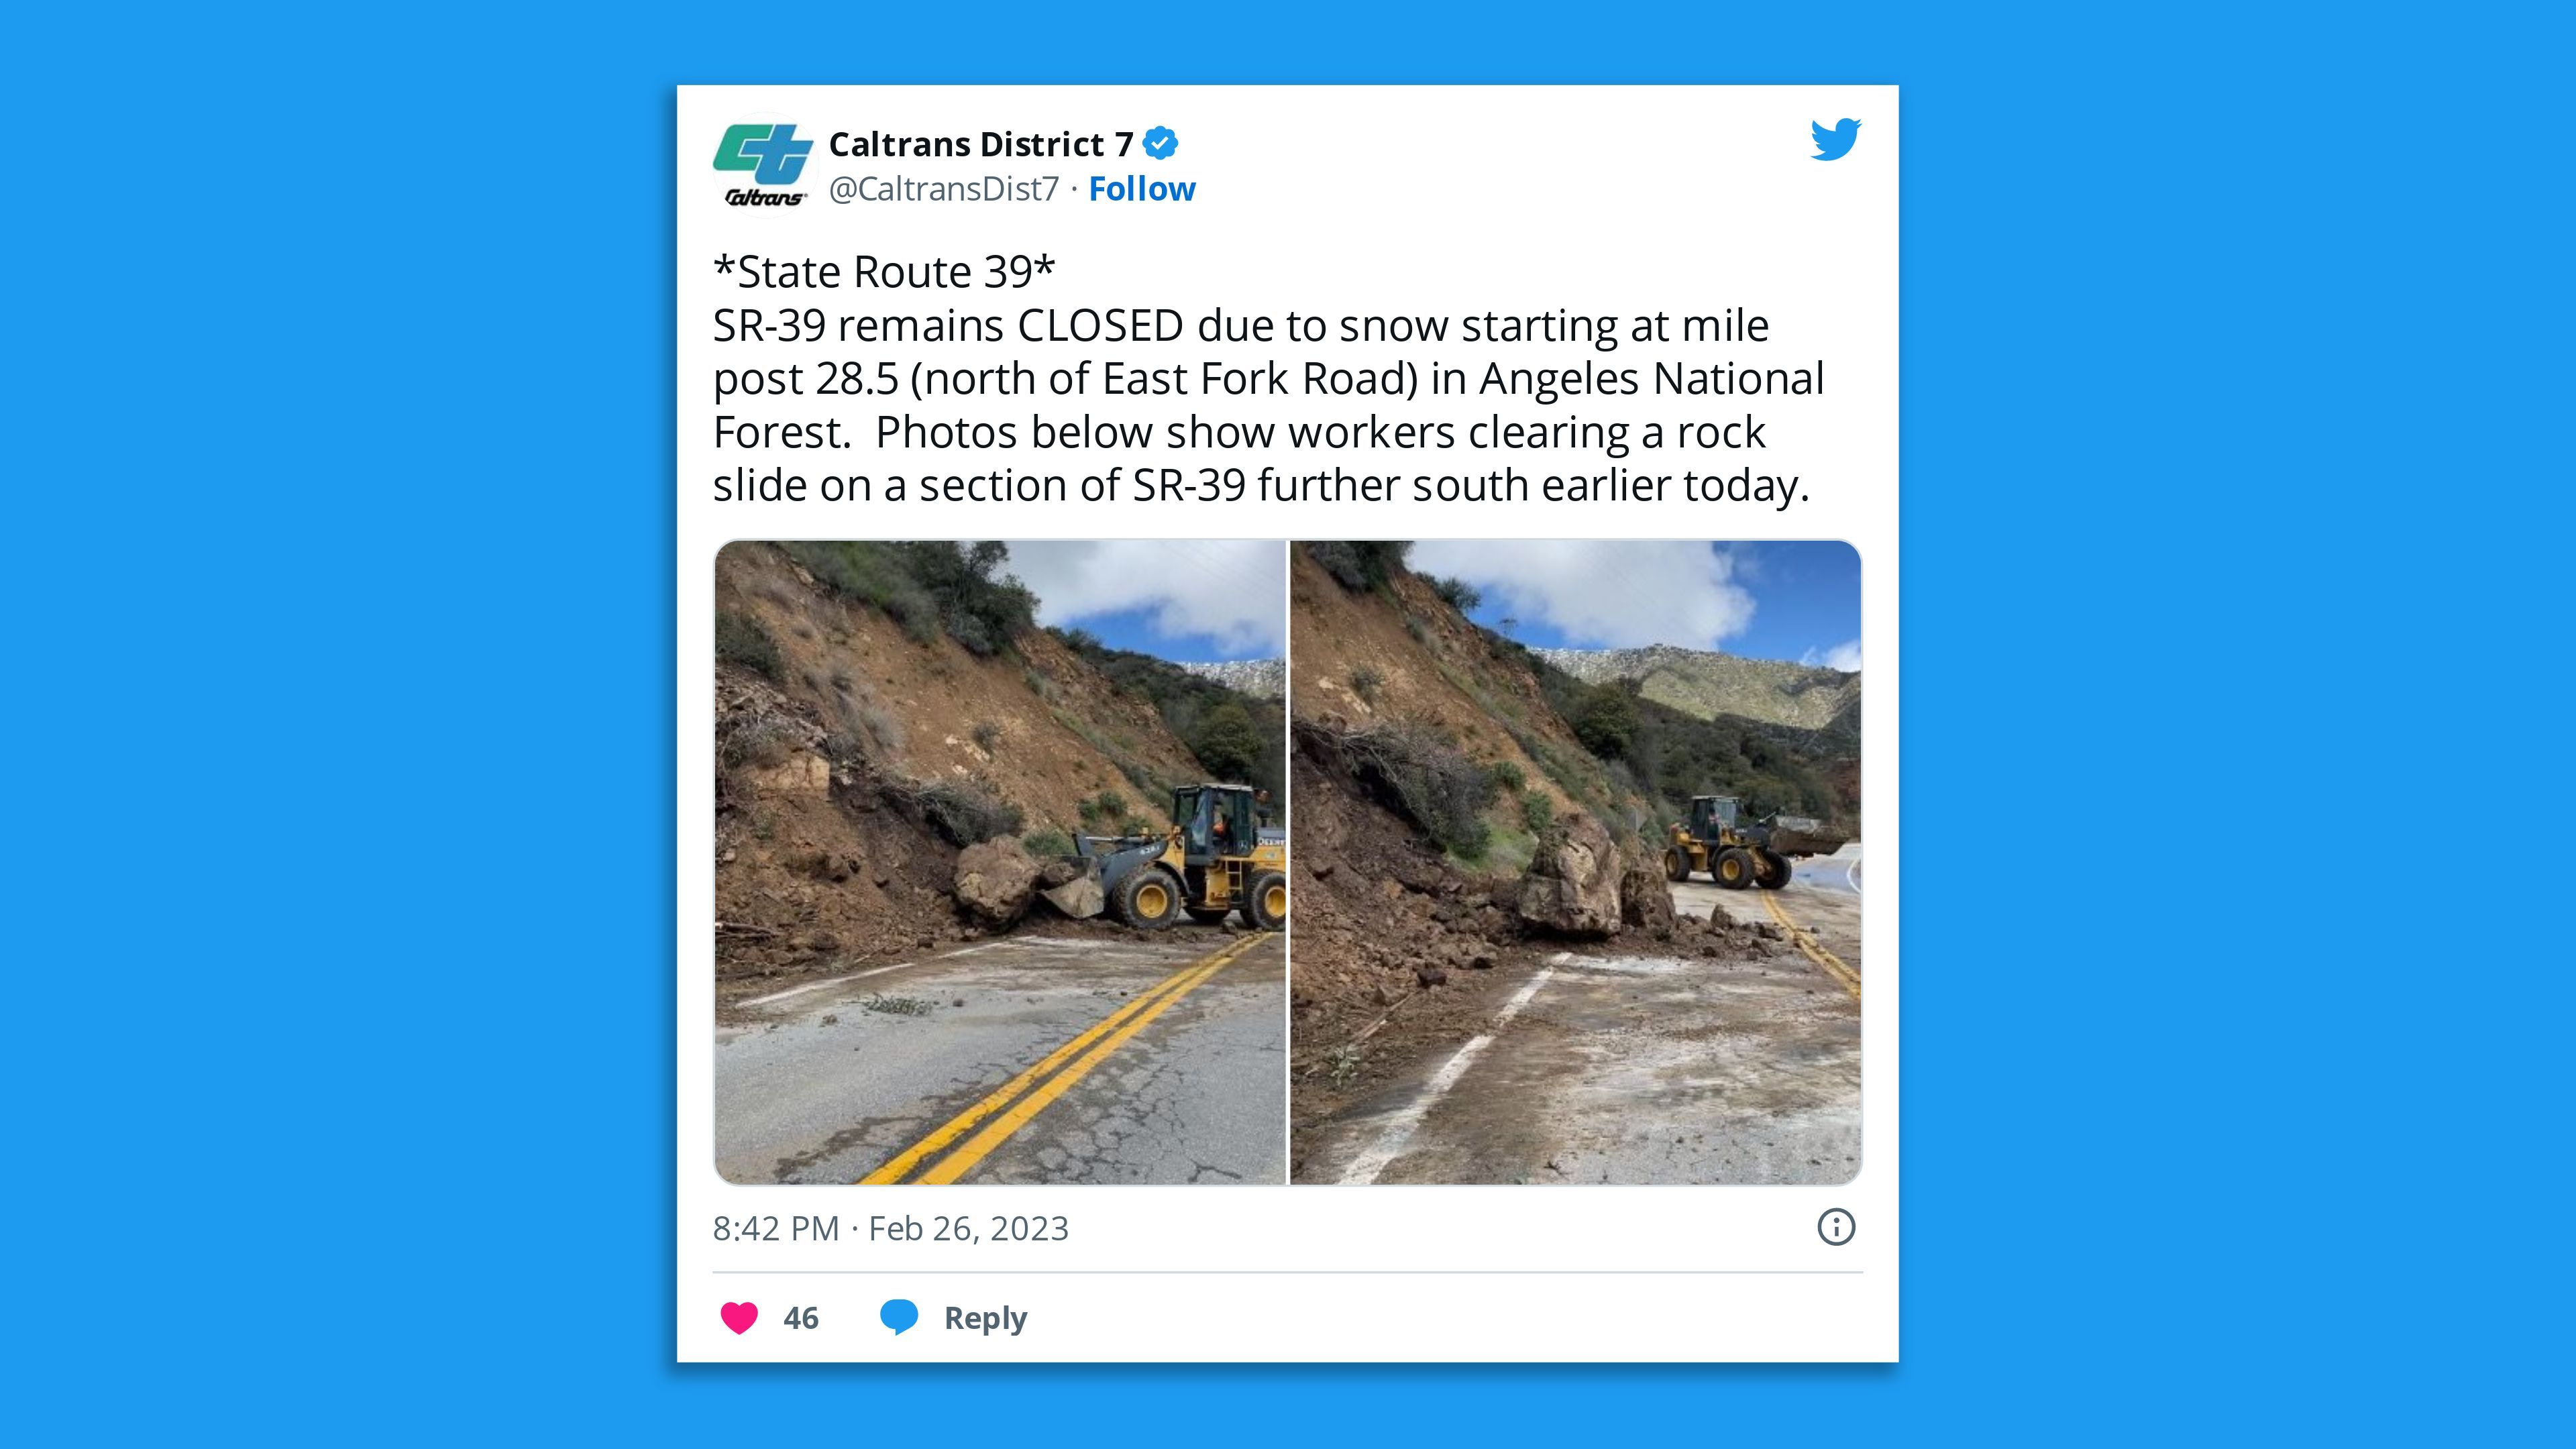 A screenshot of a Caltrans tweet stating: " SR-39 remains CLOSED due to snow starting at mile post 28.5 (north of East Fork Road) in Angeles National Forest.  Photos below show workers clearing a rock slide on a section of SR-39 further south earlier today."